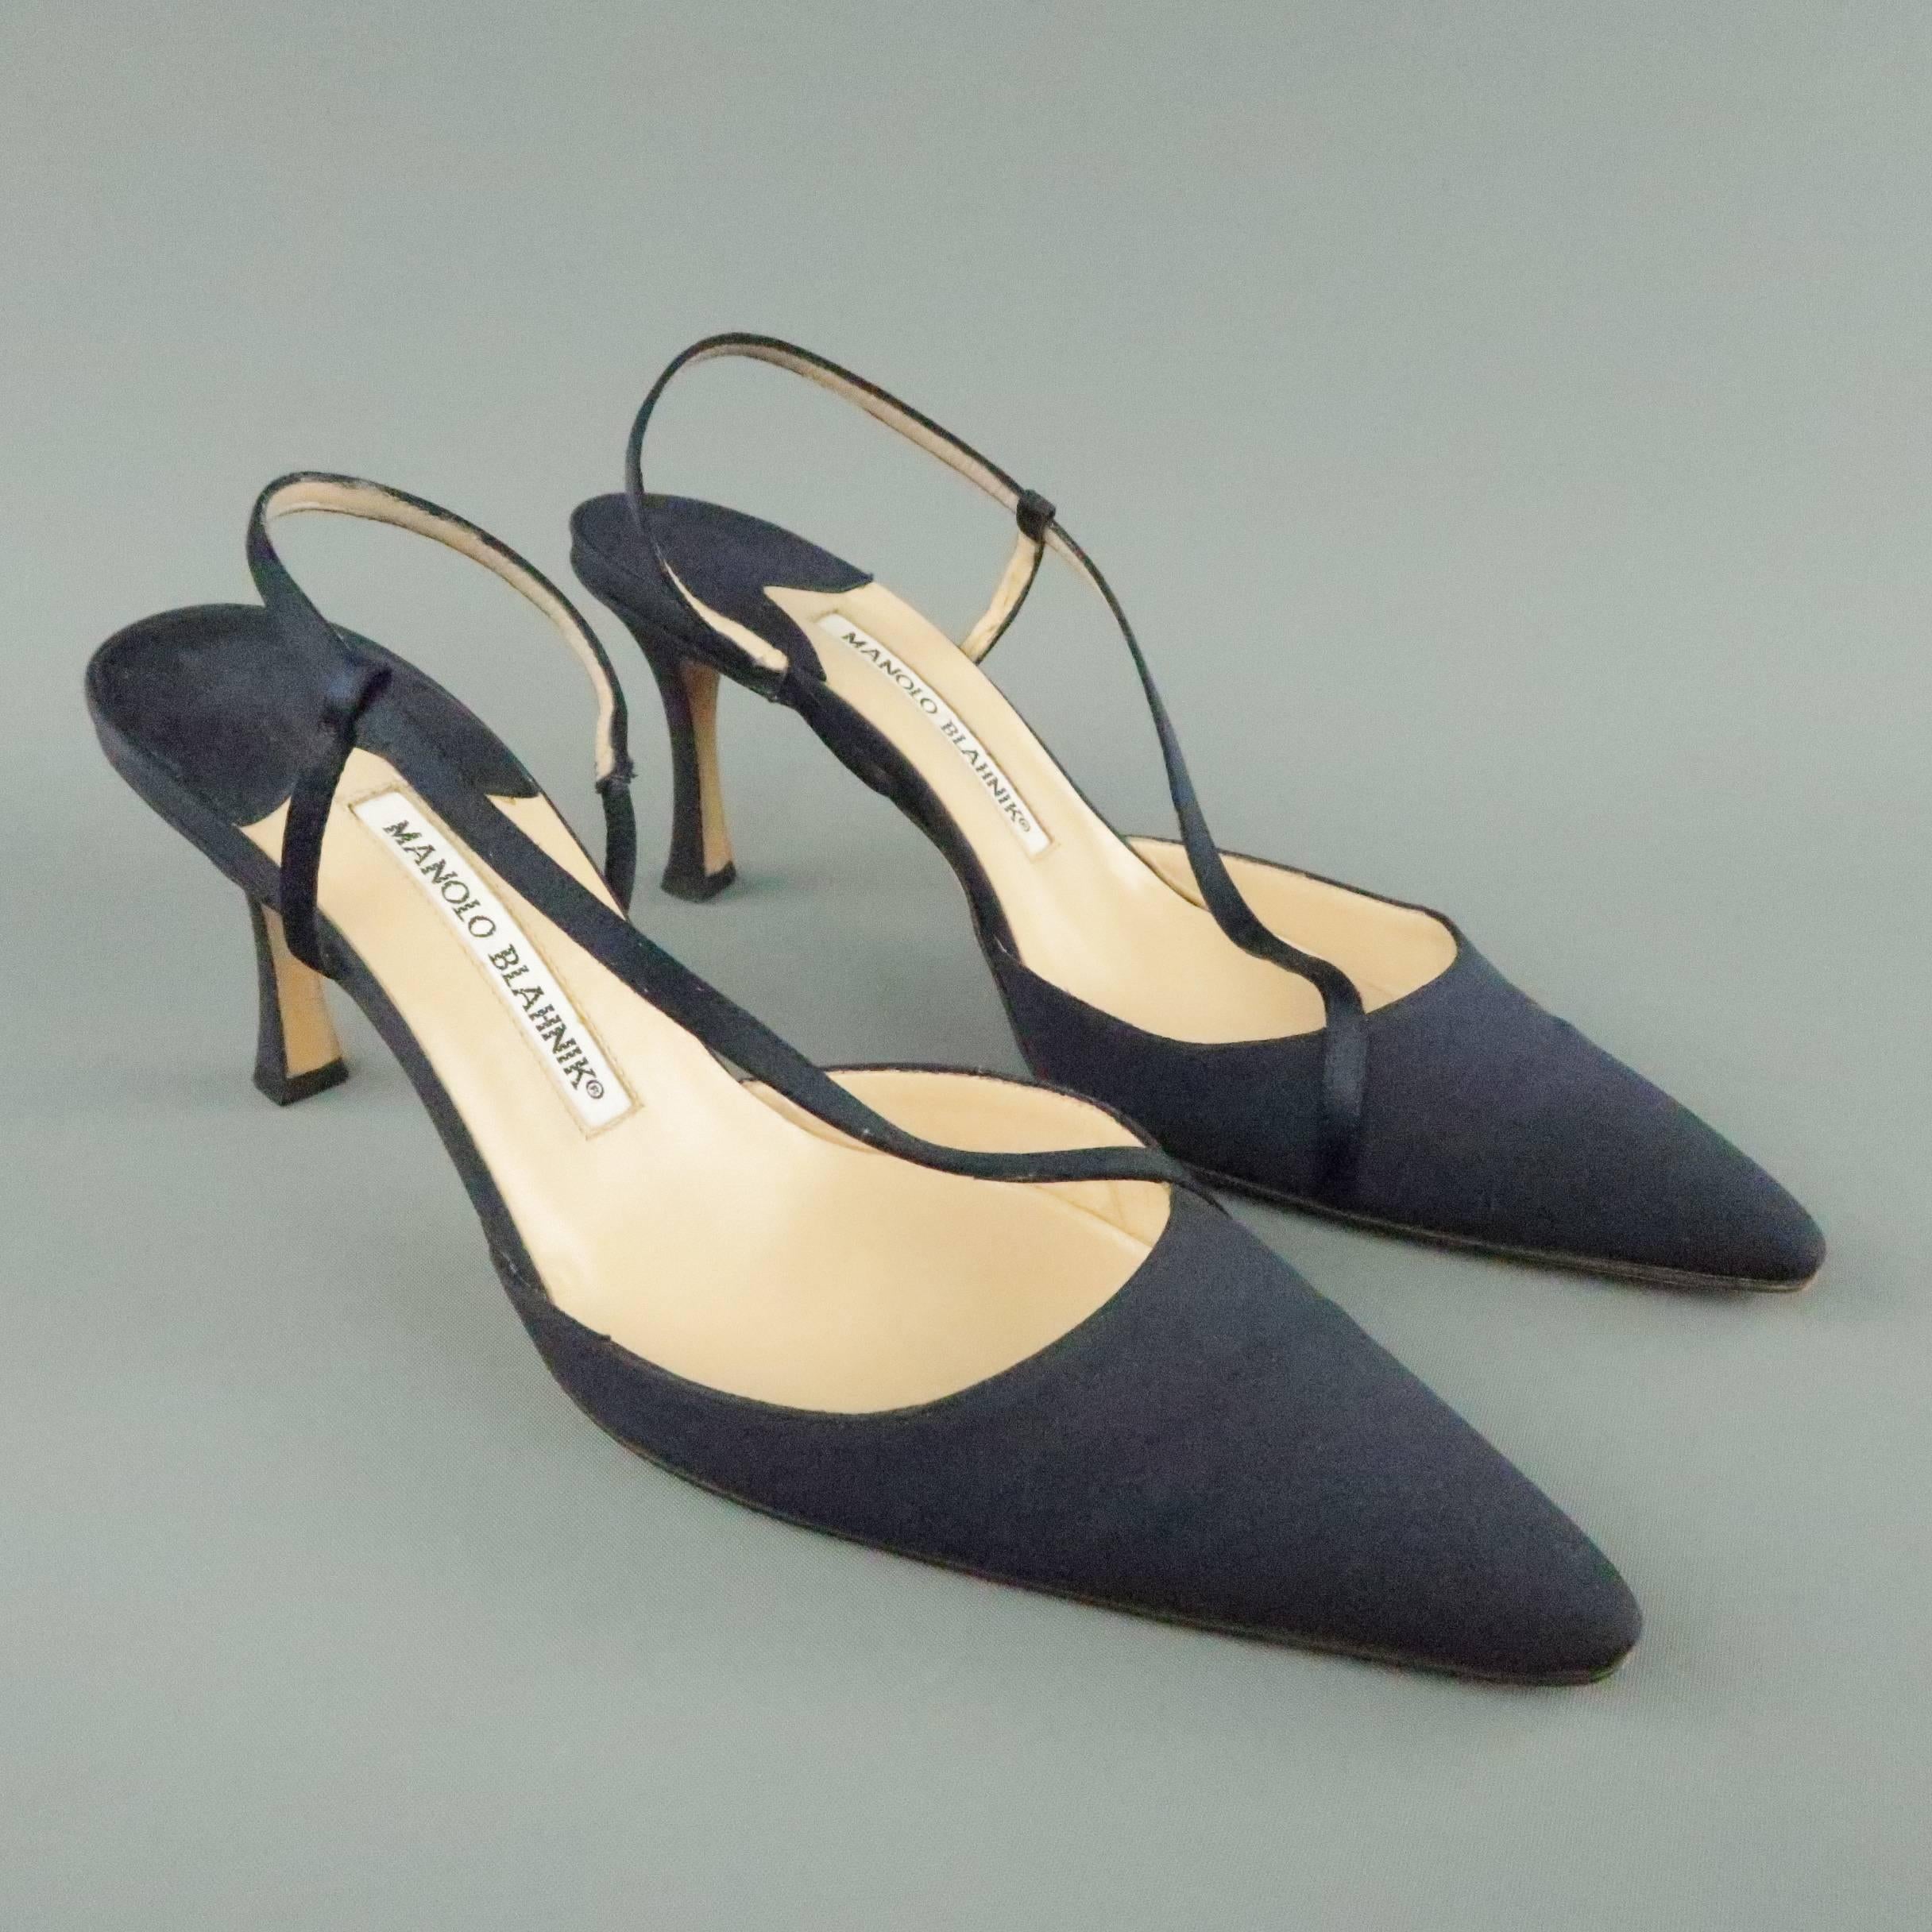 MANOLO BLAHNIK pumps come in navy blue fabric and feature a pointed toe, sling back, and diagonal strap. With box. Made in Italy.
 
Good Pre-Owned Condition.
Marked: IT 38.5
 
Heel: 3 in.
